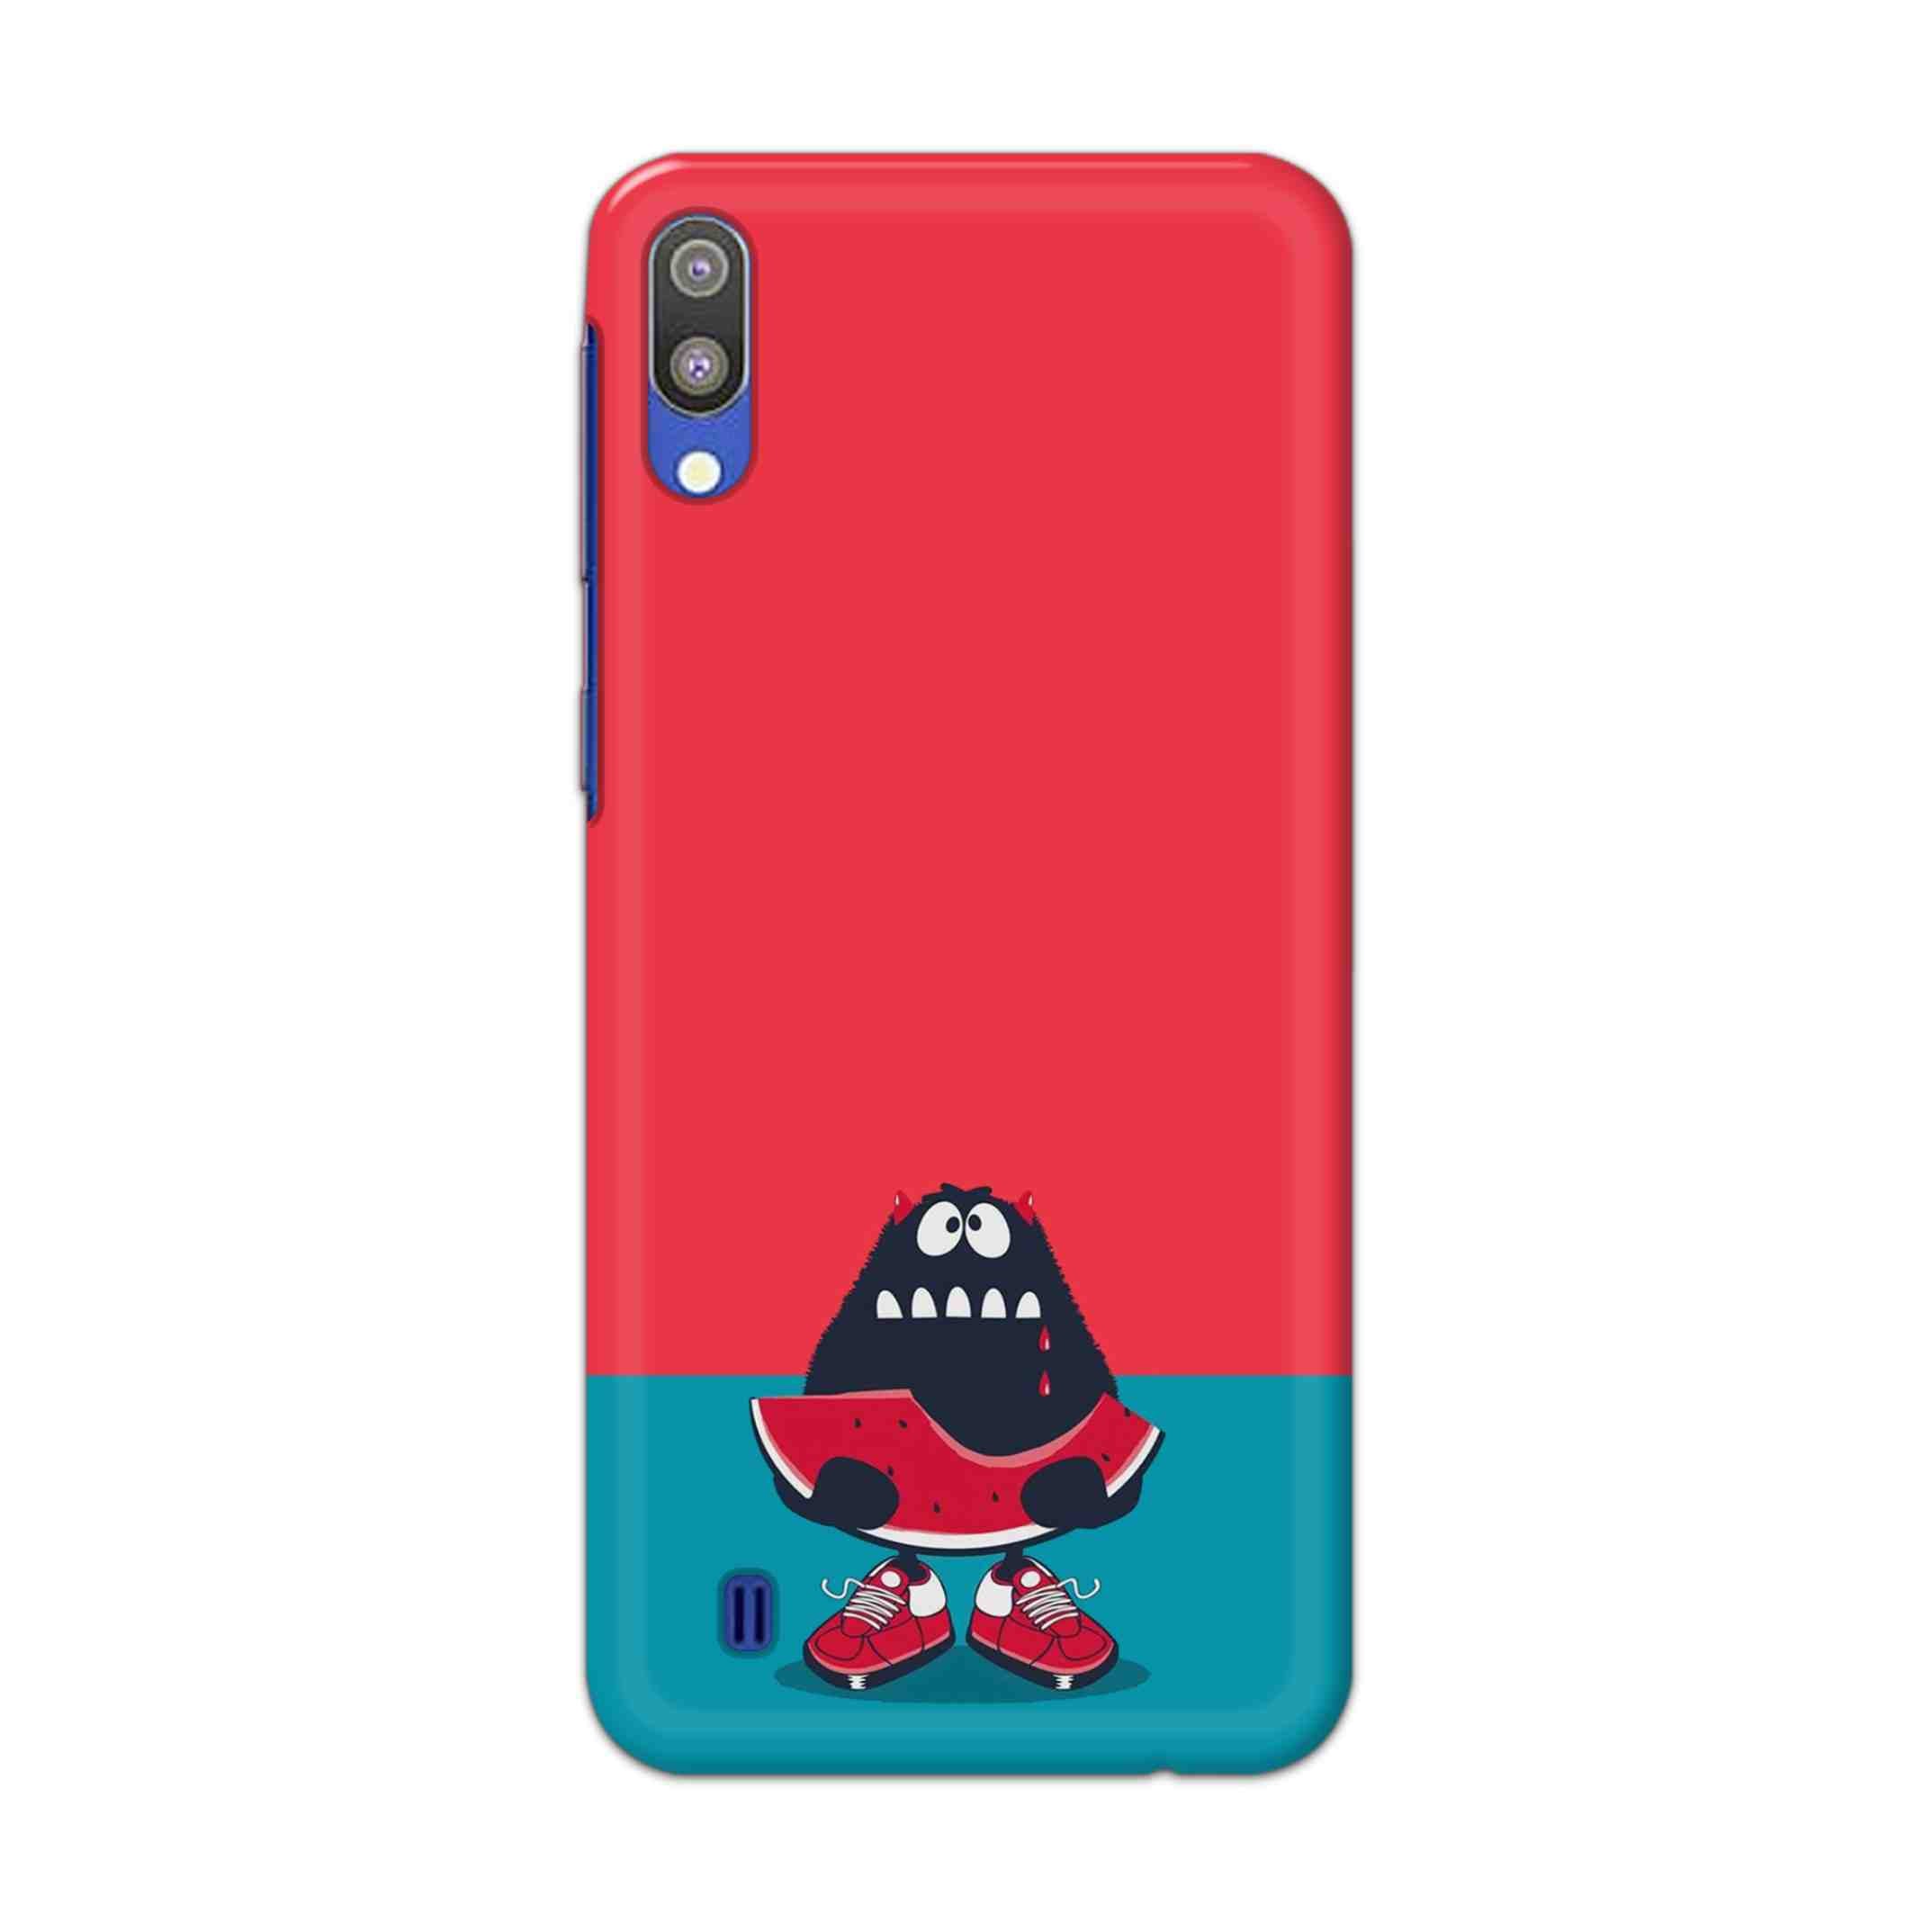 Buy Watermelon Hard Back Mobile Phone Case Cover For Samsung Galaxy M10 Online